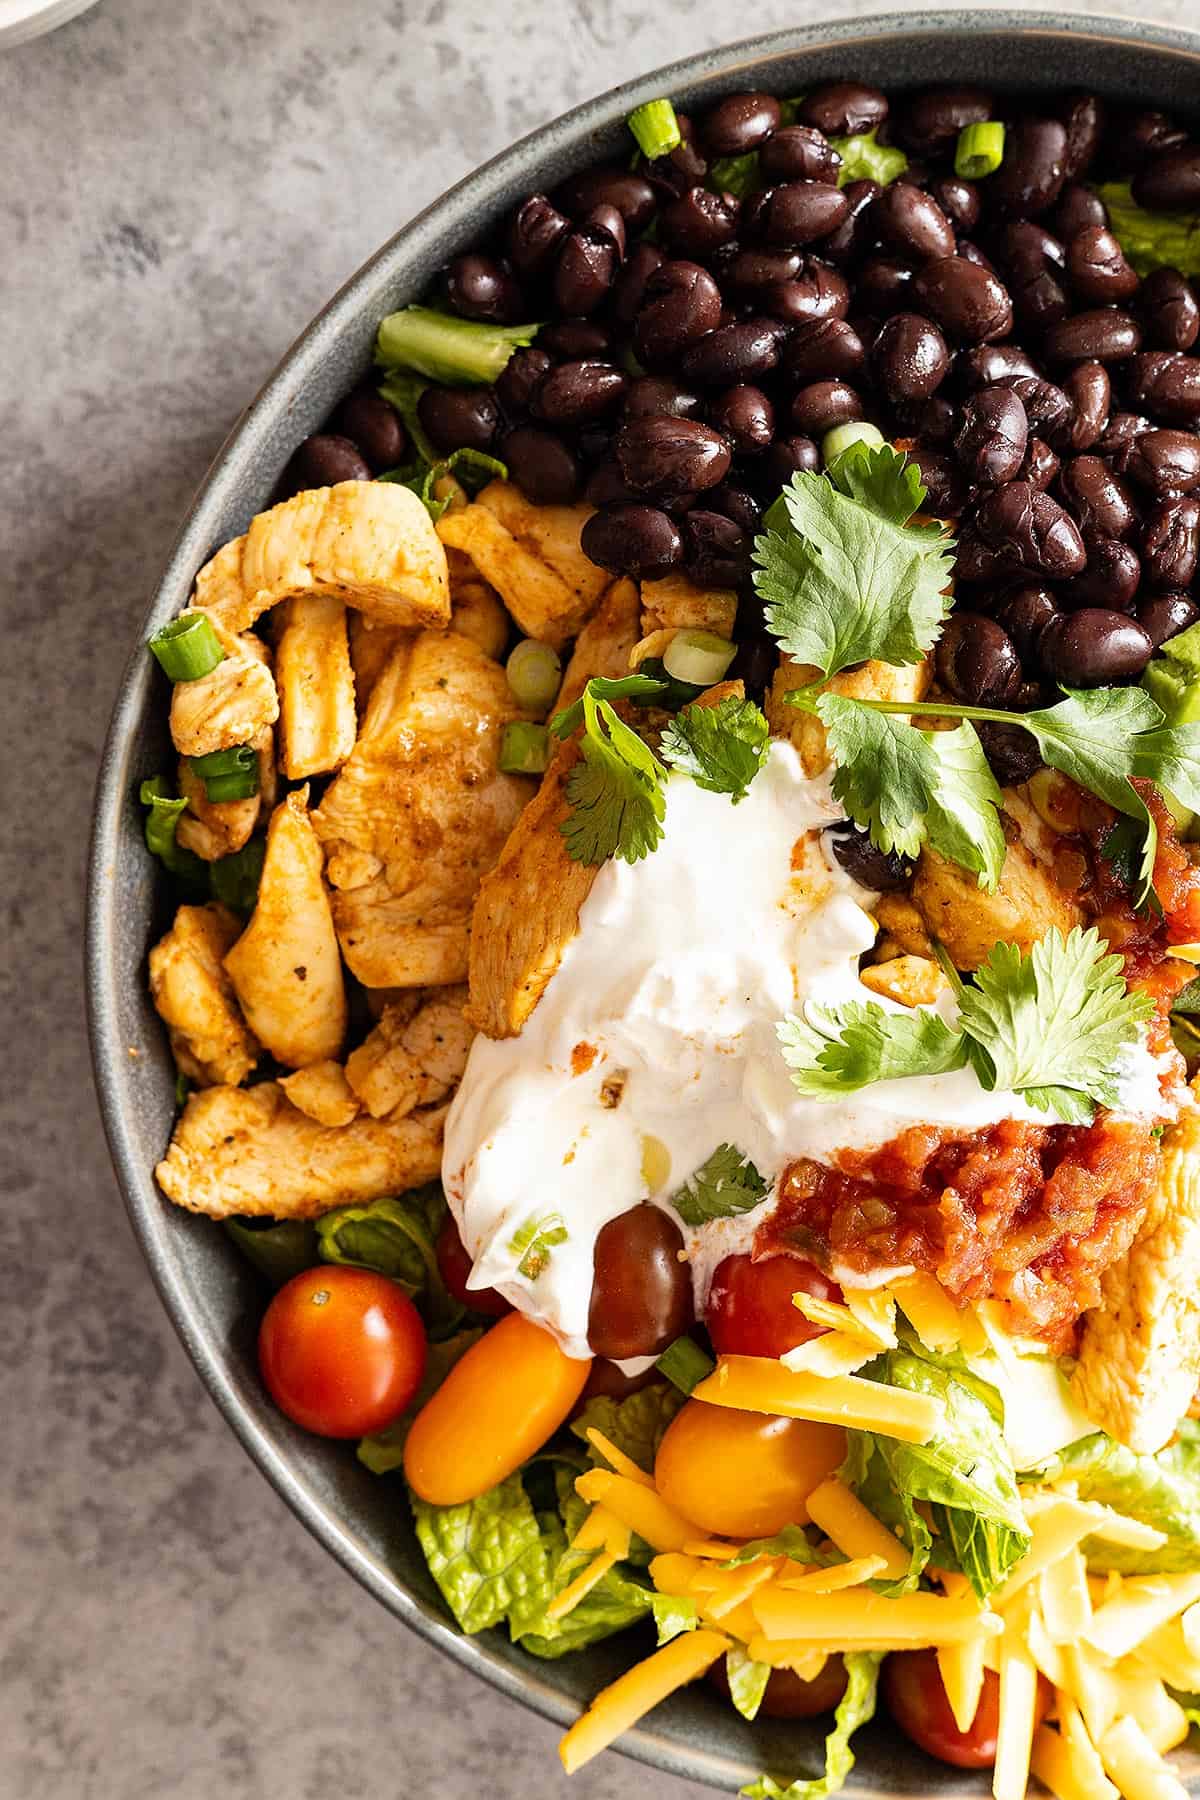 Overhead view of chicken taco bowl ingredients in a large bowl. Chicken, beans, sour cream, salsa, and cheese in view.